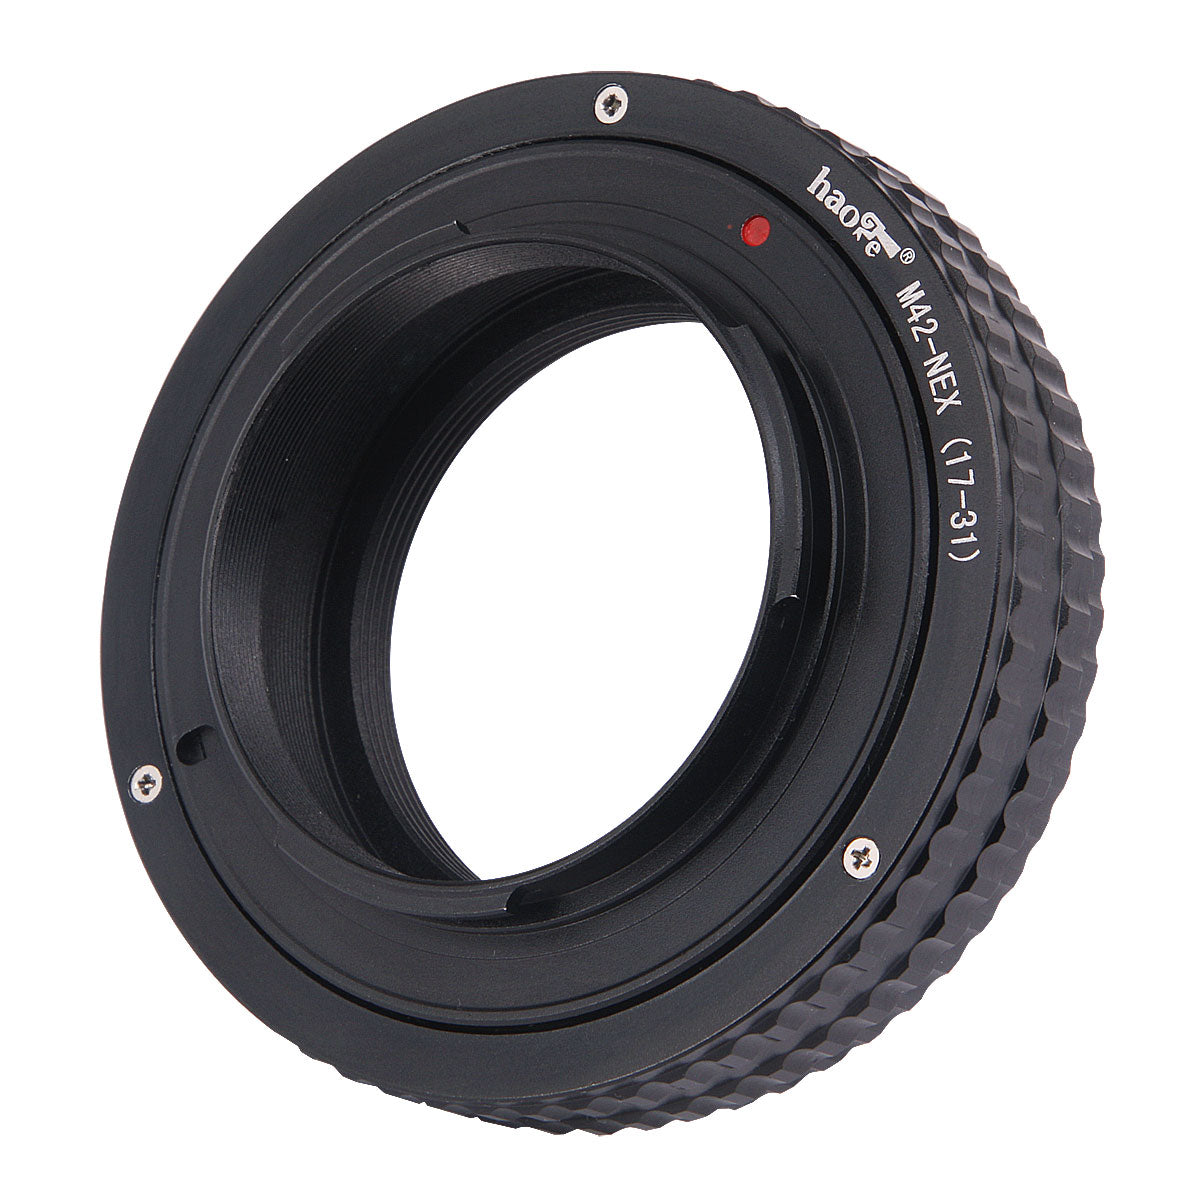 Haoge Macro Focus Lens Mount Adapter Built-in Focusing Helicoid for M42 42mm Screw mount Lens to Sony E-mount NEX Camera 17mm-31mm